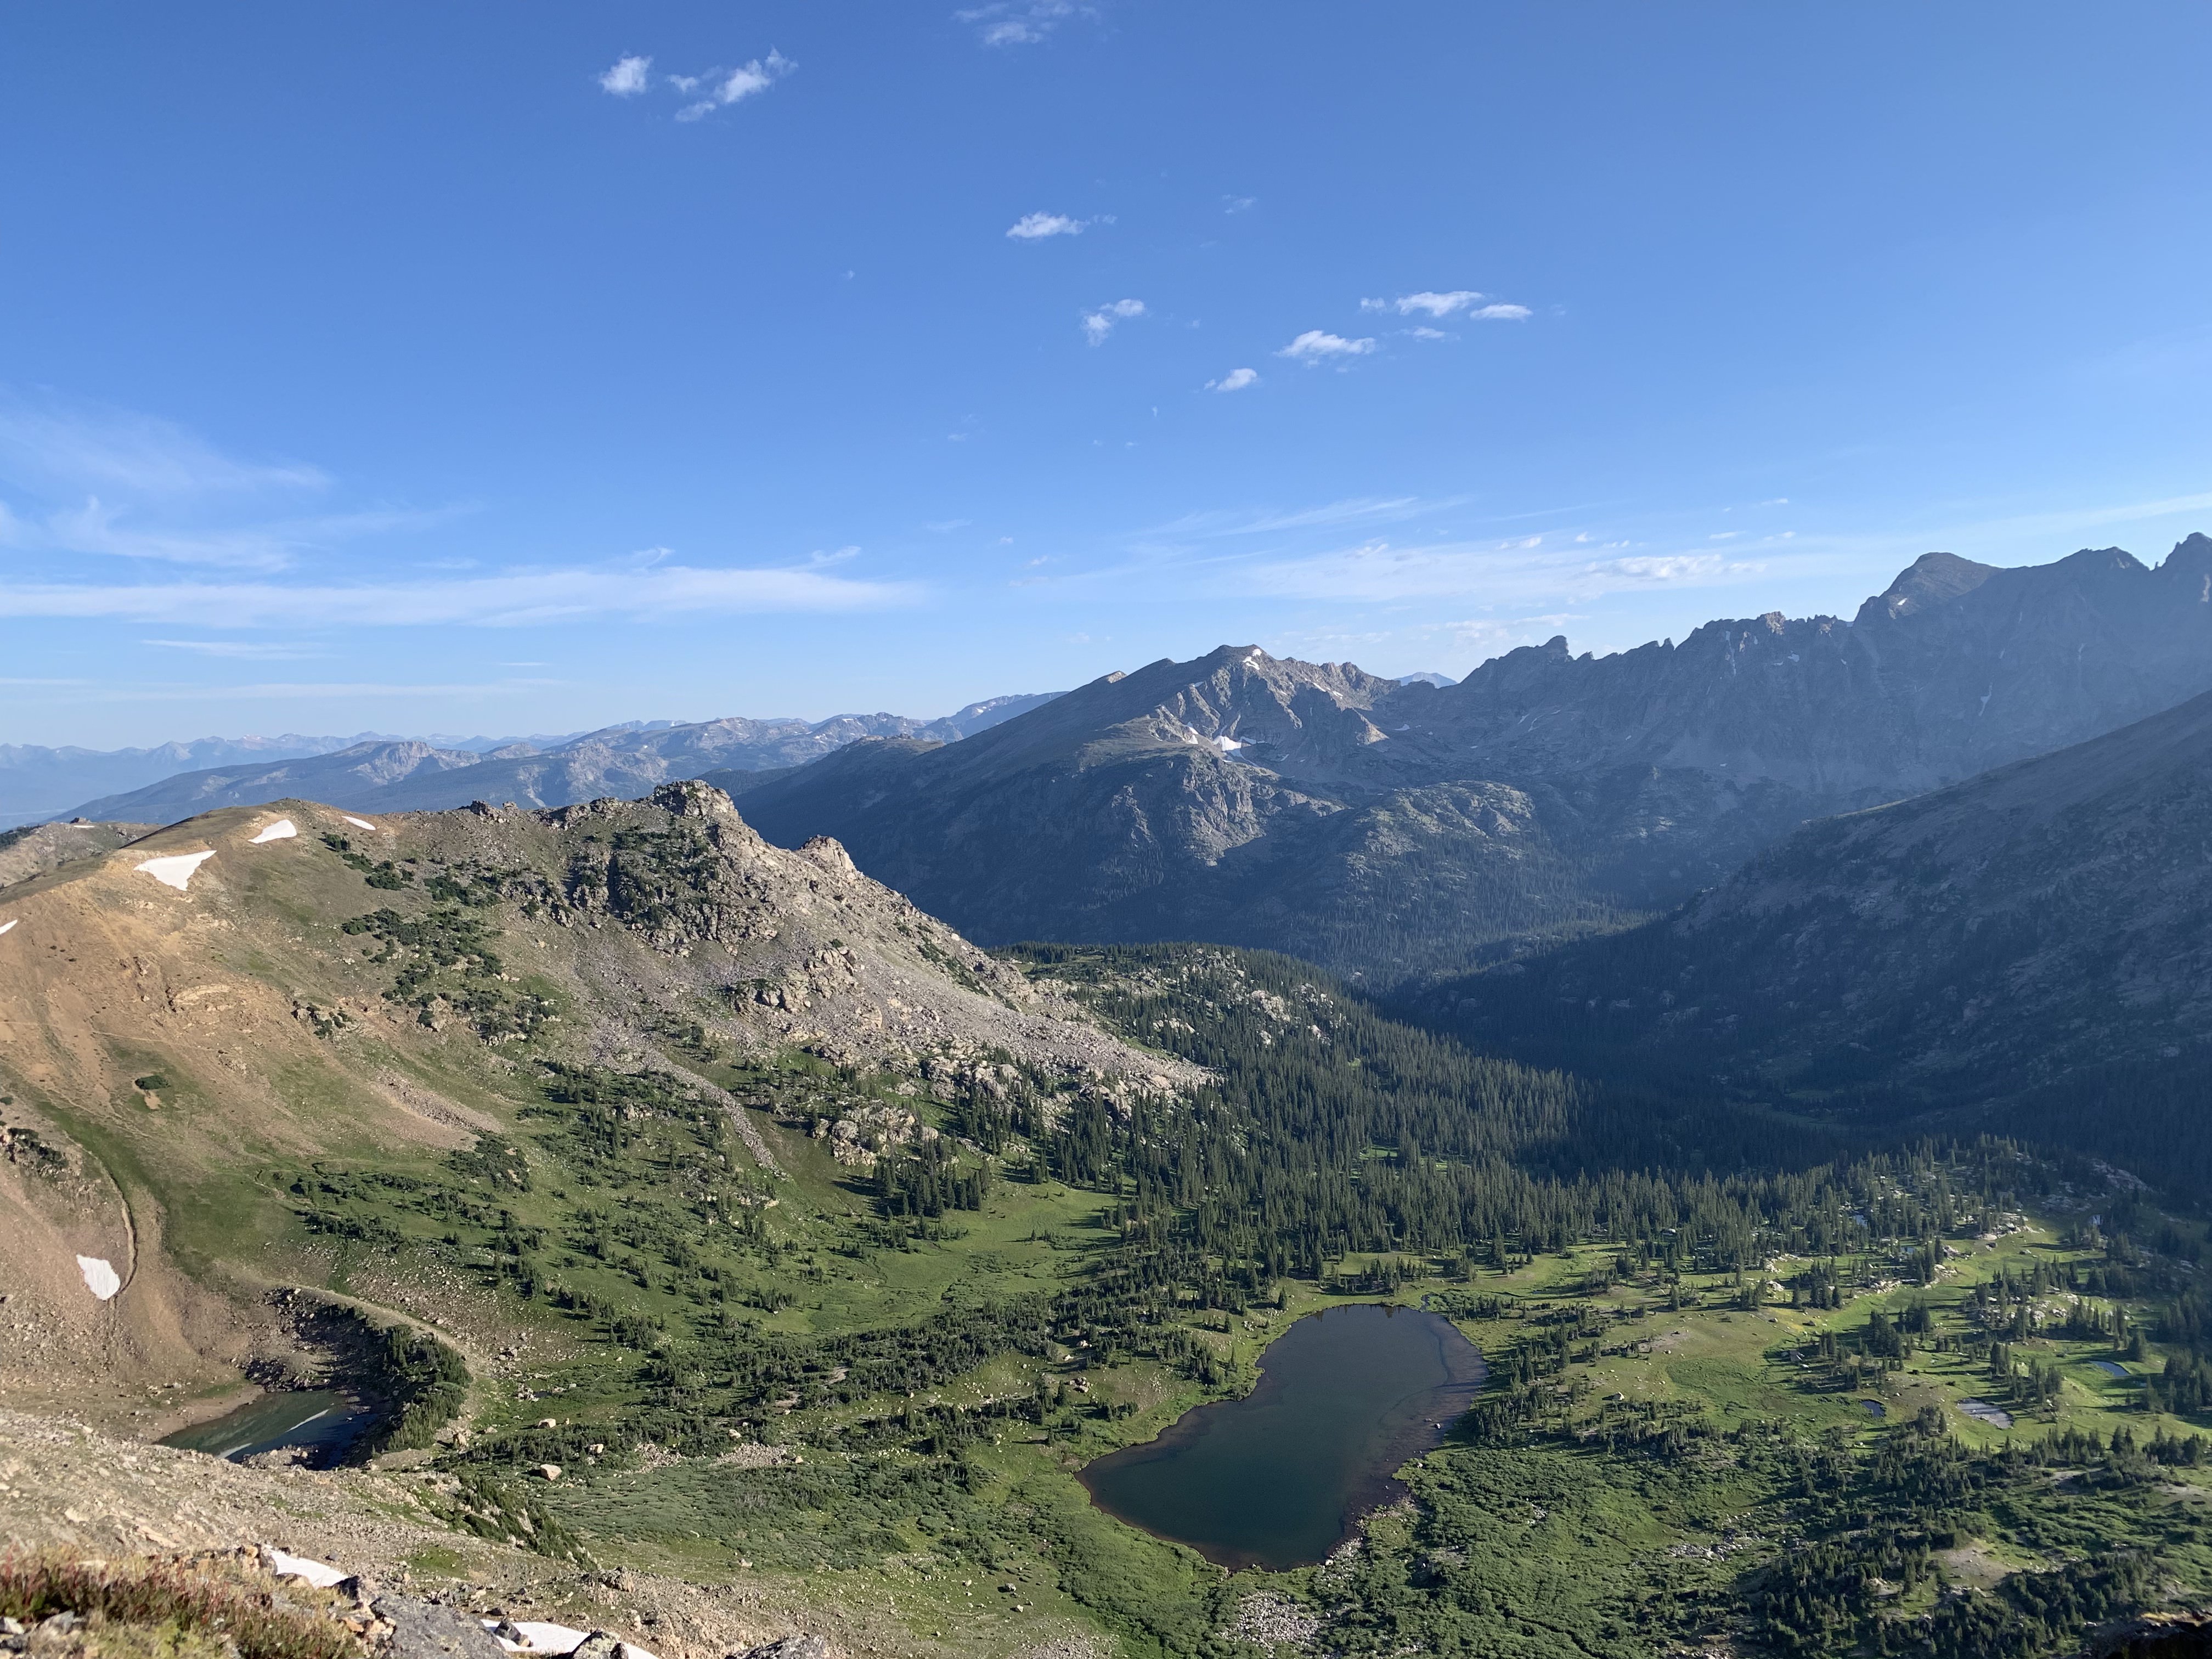 View from Arapaho Pass. You can see pretty much the entire PT that crosses through IPW from here.